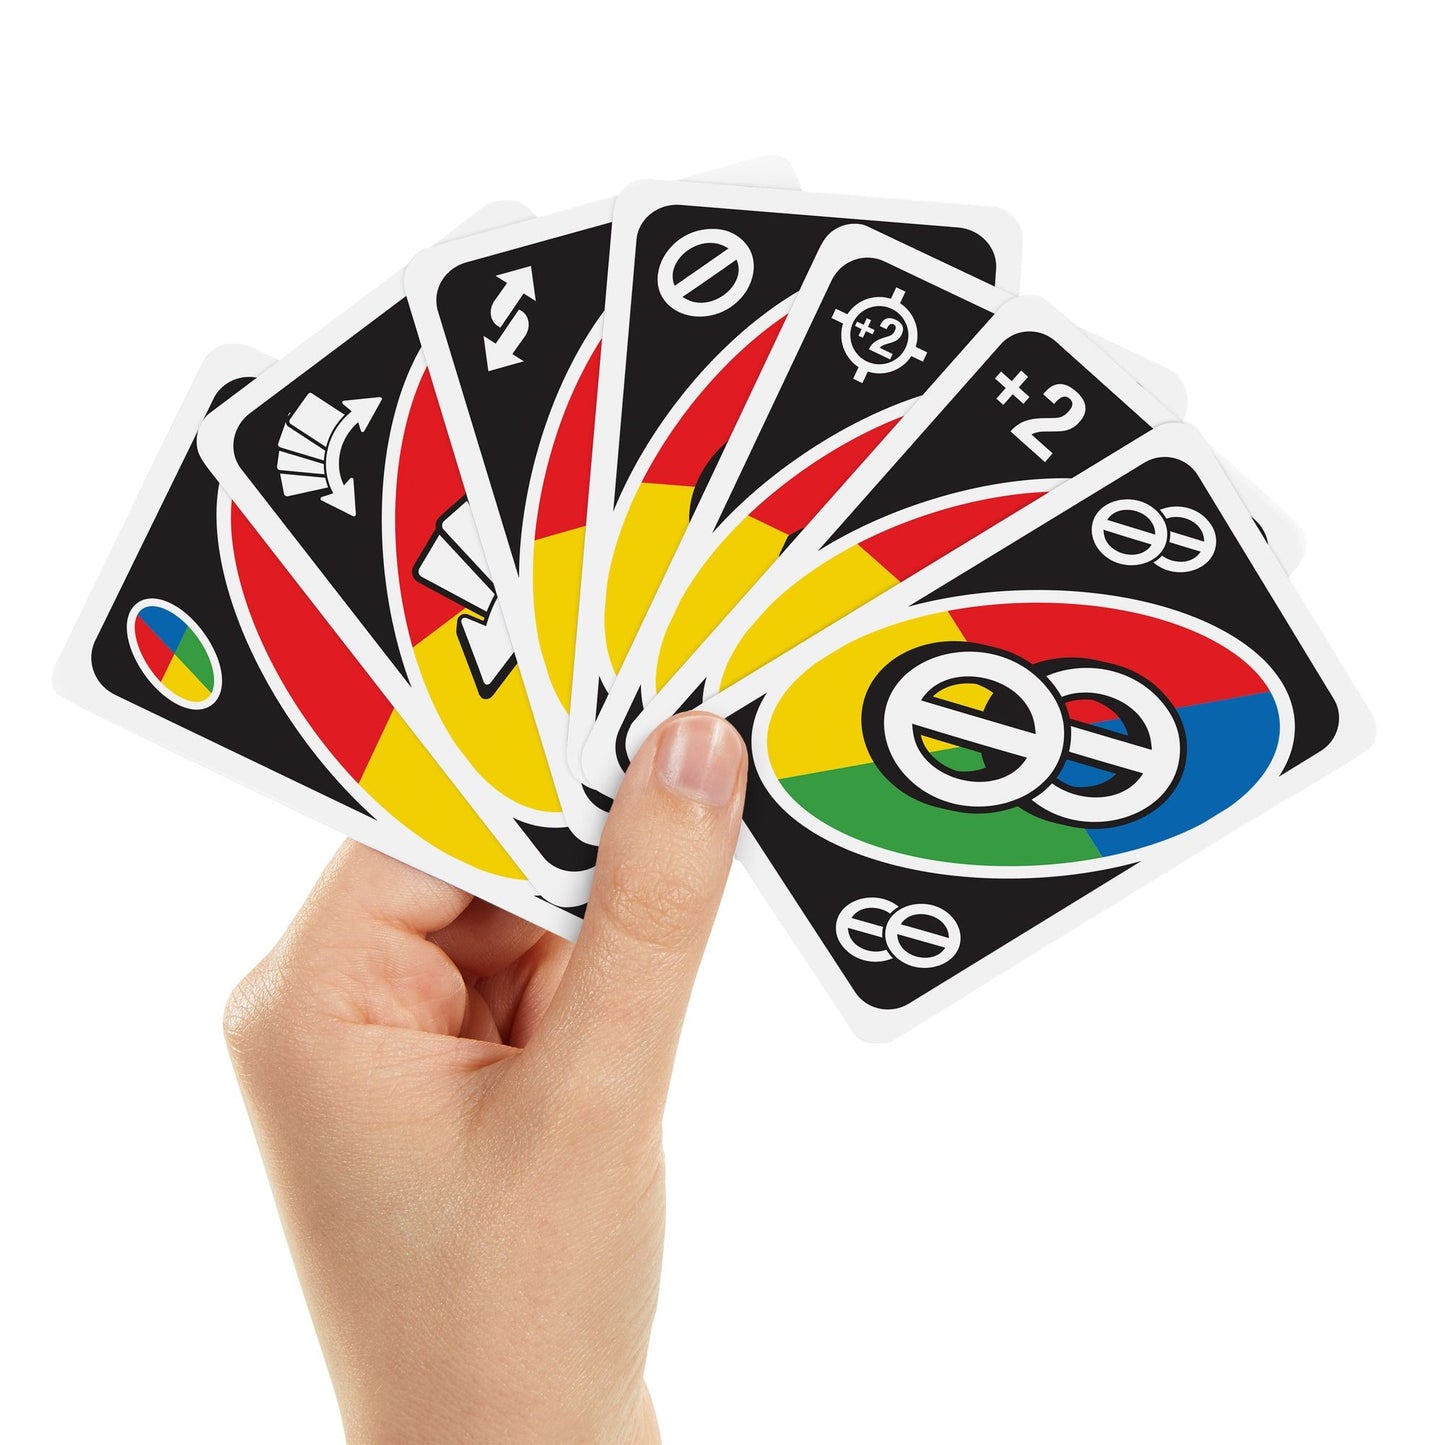 UNO All Wild -  every single card is wild for a fast-paced, even more unpredictable version of this family favorite!